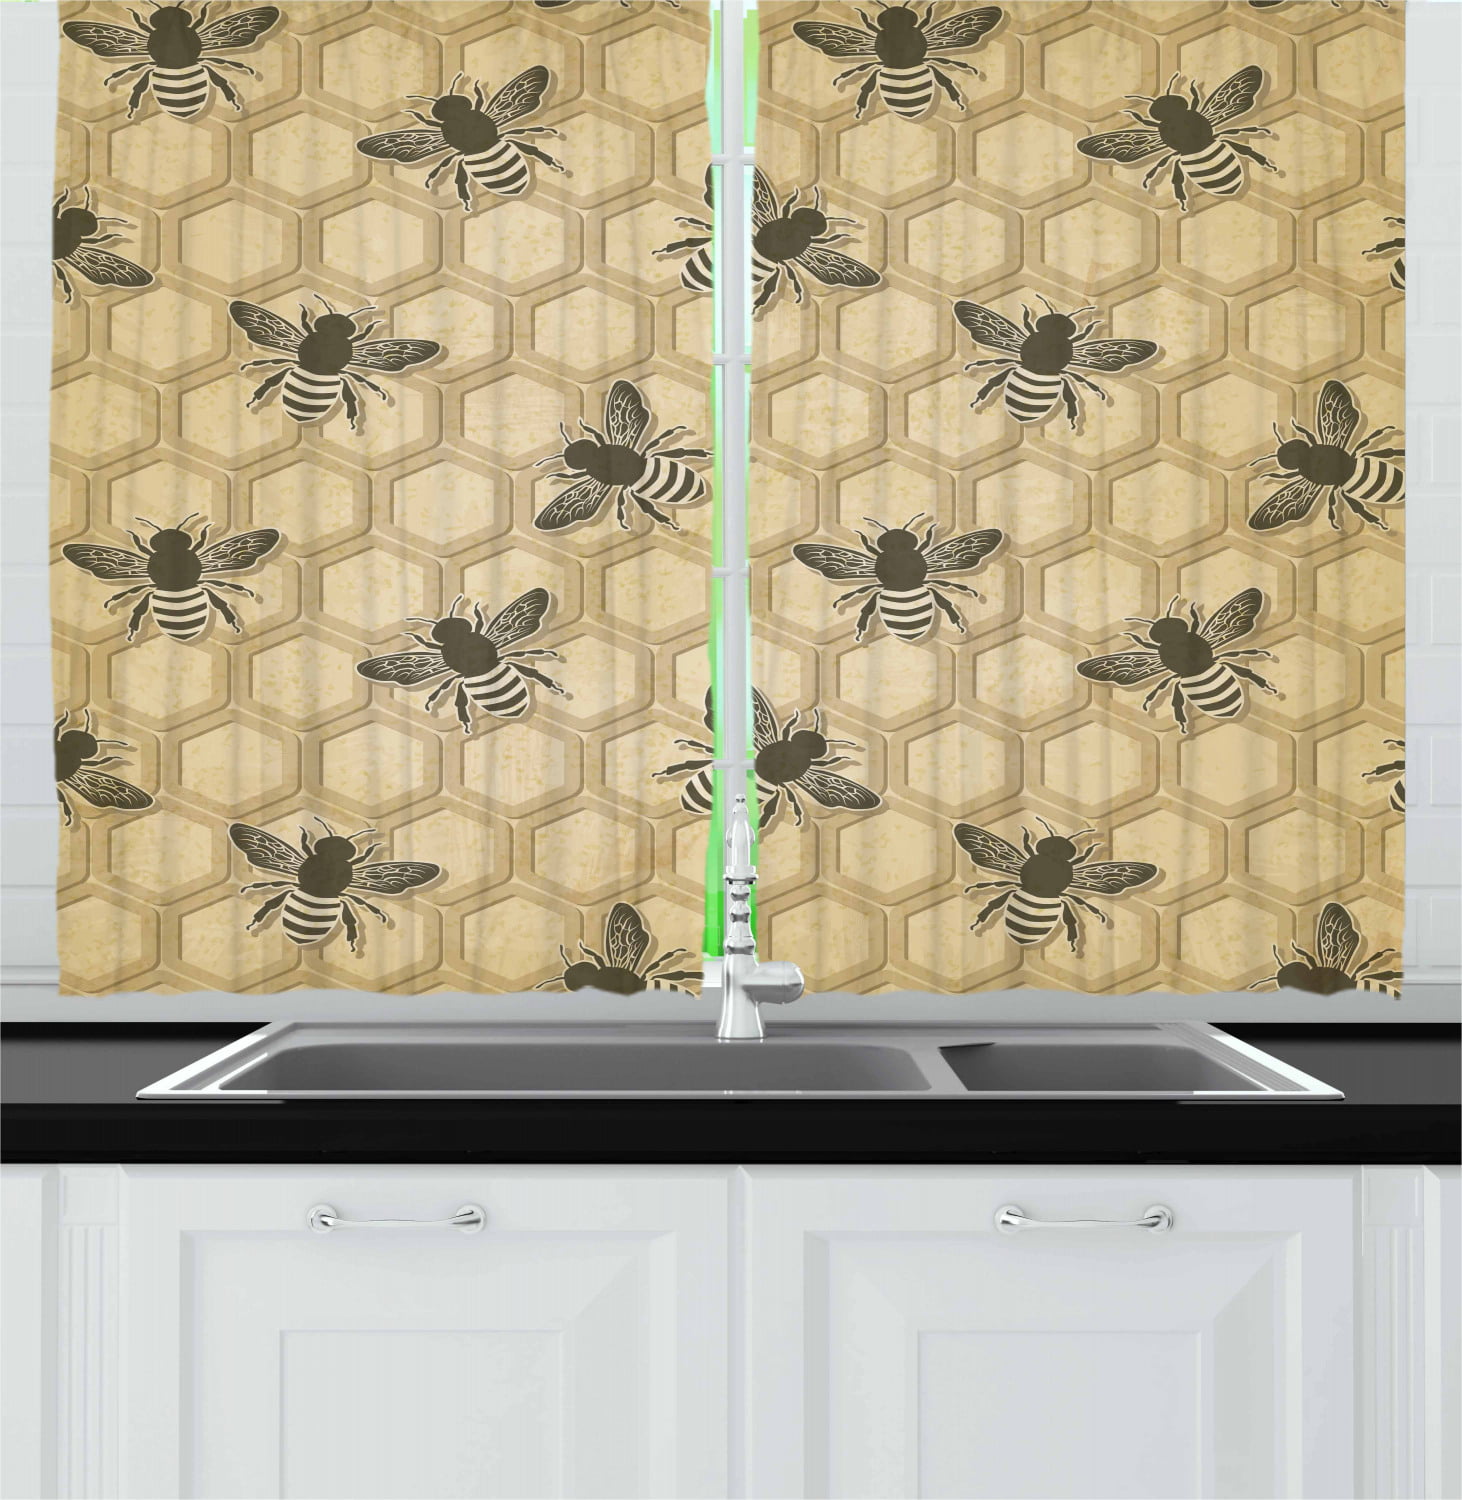 Queen Bee Kitchen Curtains 2 Panel Set Window Drapes 55" X 39" Ambesonne 